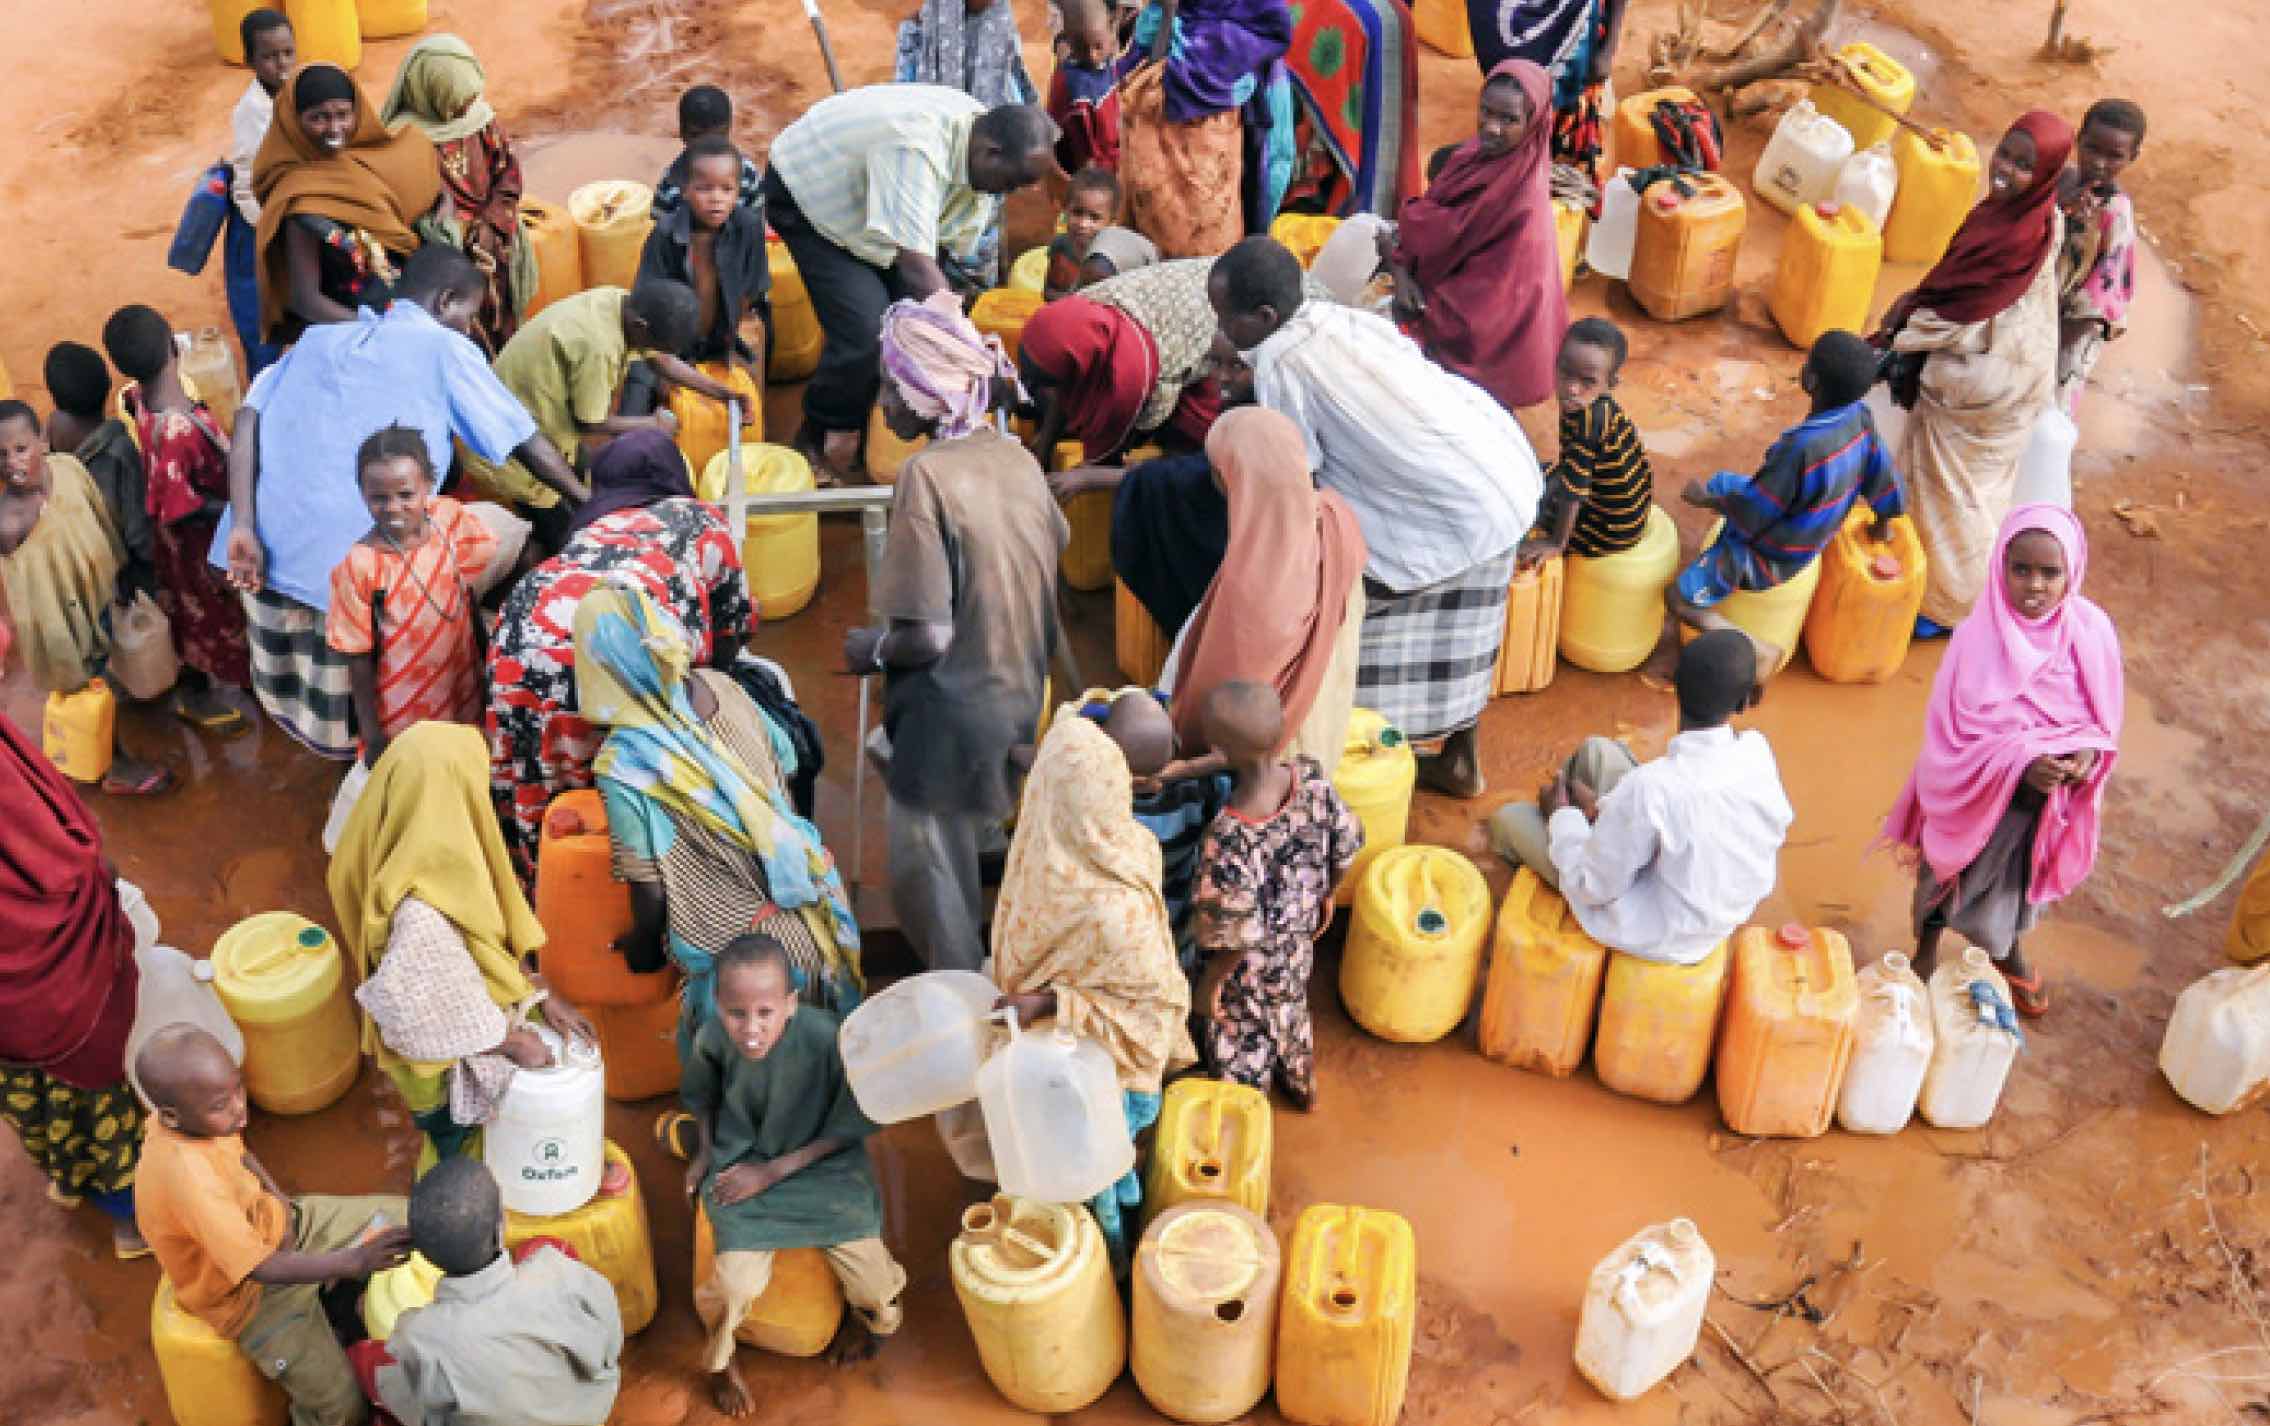 Overhead view of group of men, women, children gathering with water containers around spigots